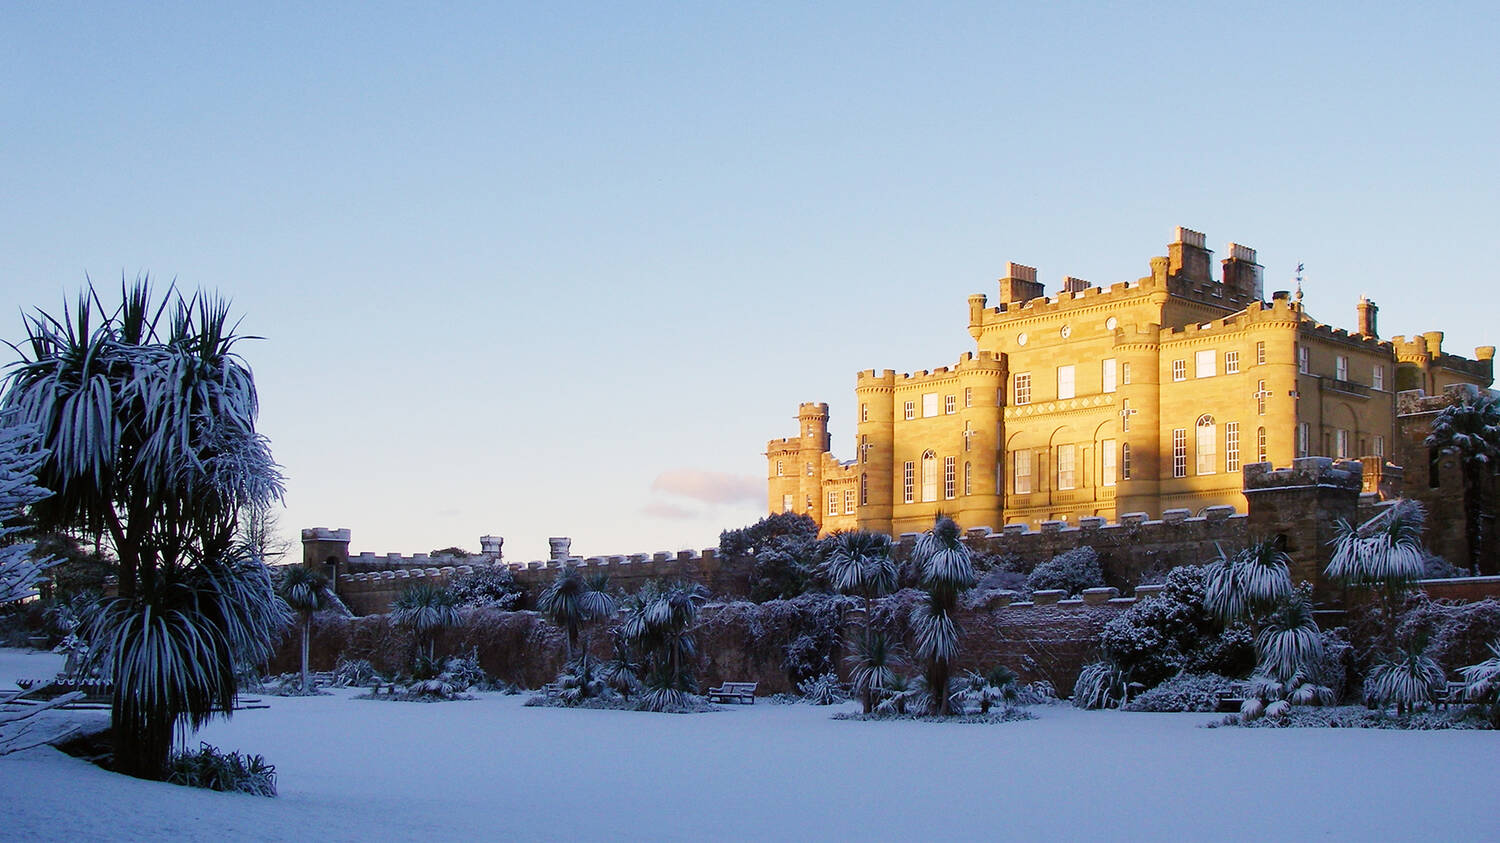 A view of Culzean Castle on a snowy day. The sun shines off the east-facing wall, making it glow orange. Thick snow covers the gardens and shrubs in the foreground, which are in the shade.